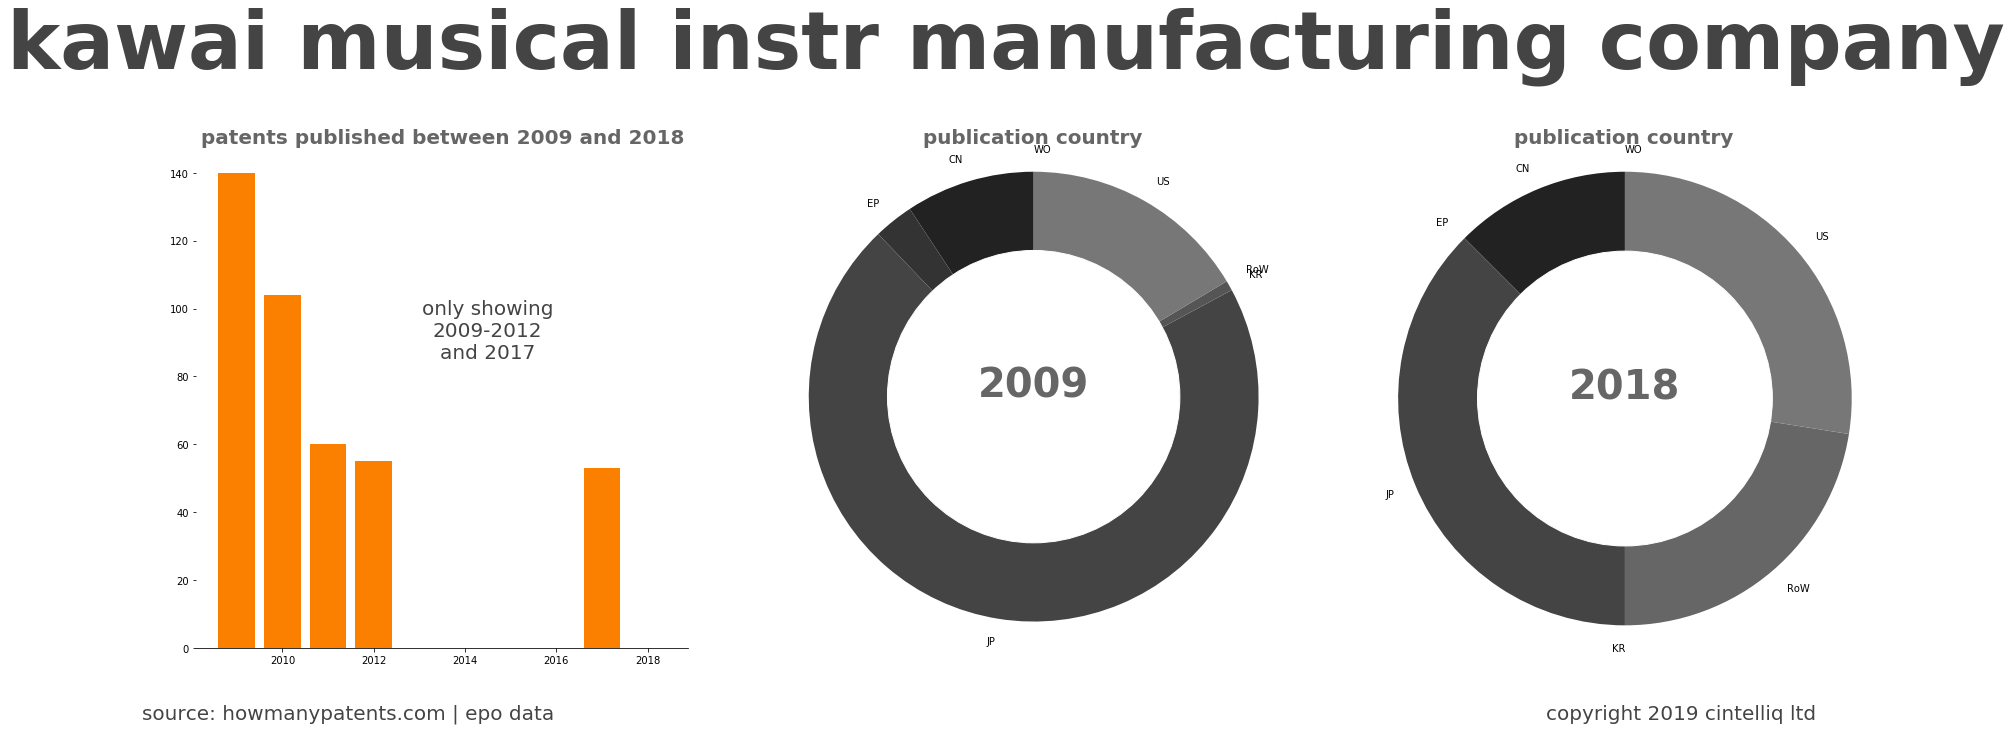 summary of patents for Kawai Musical Instr Manufacturing Company